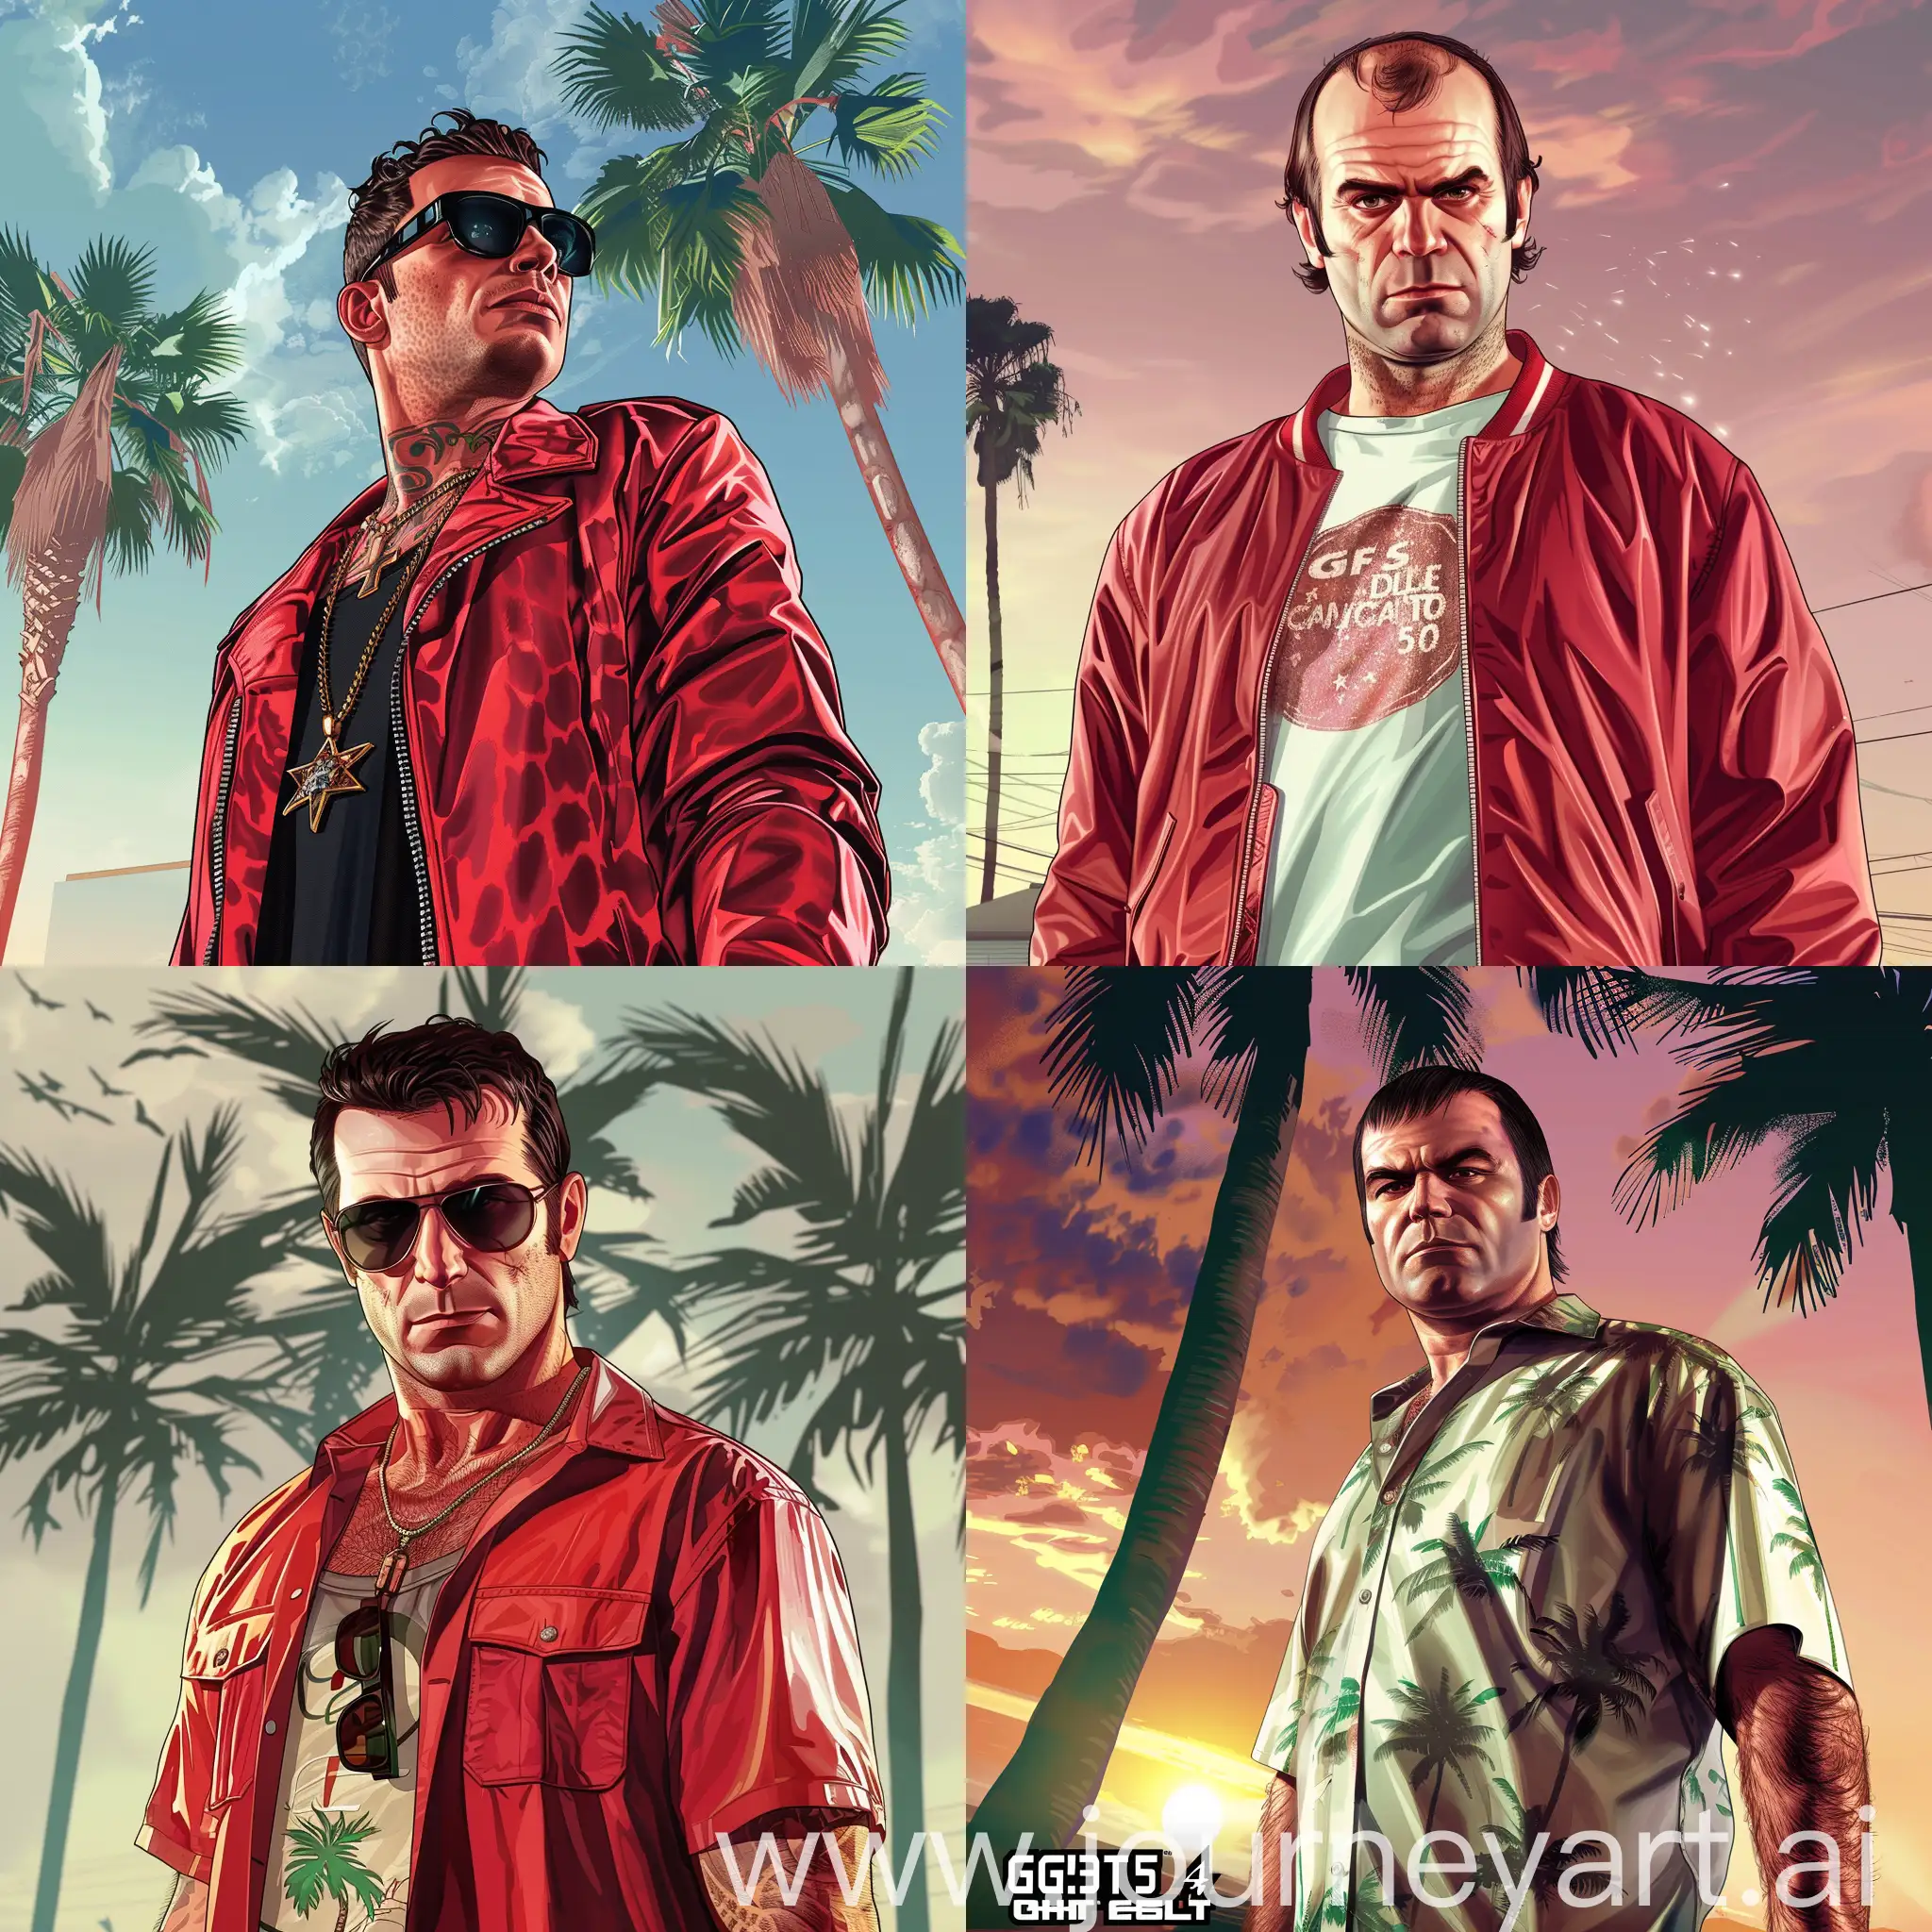 gta 5 character man on the cover --v 6 --ar 1:1 --no 41949